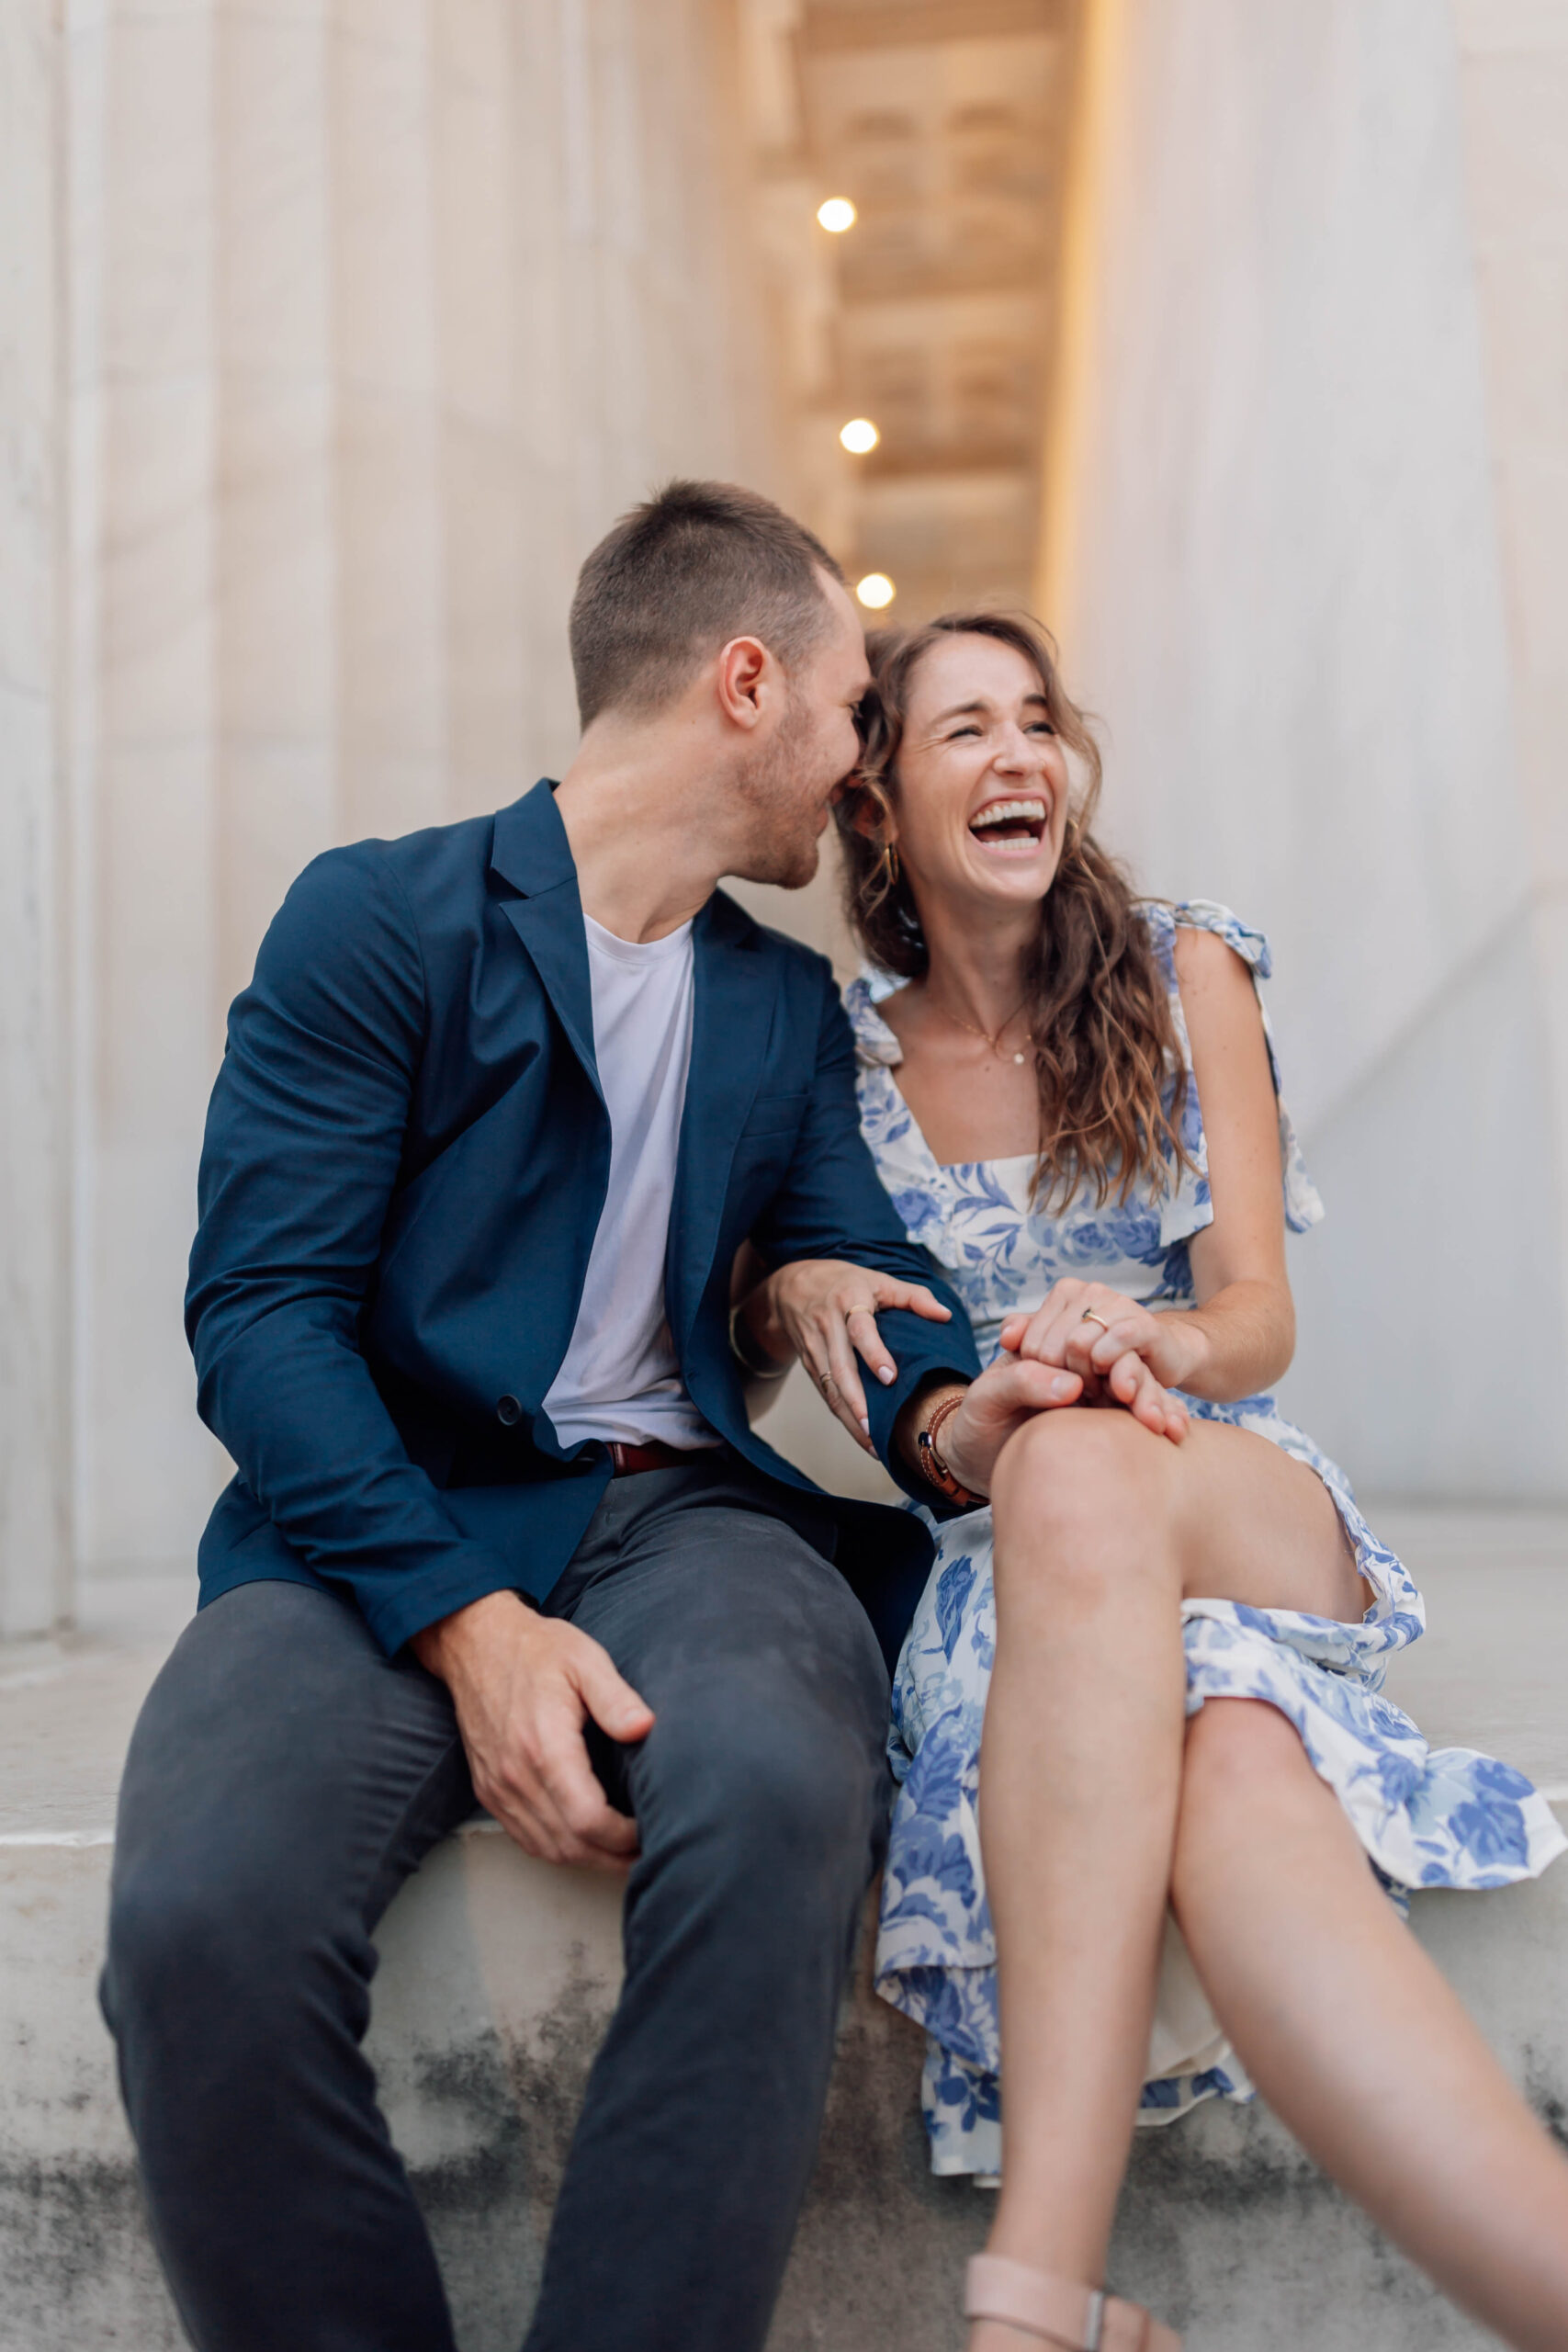 Romantic Washington D.C. Engagement Photo Session at The Lincoln Memorial. True to color, cinematic photography